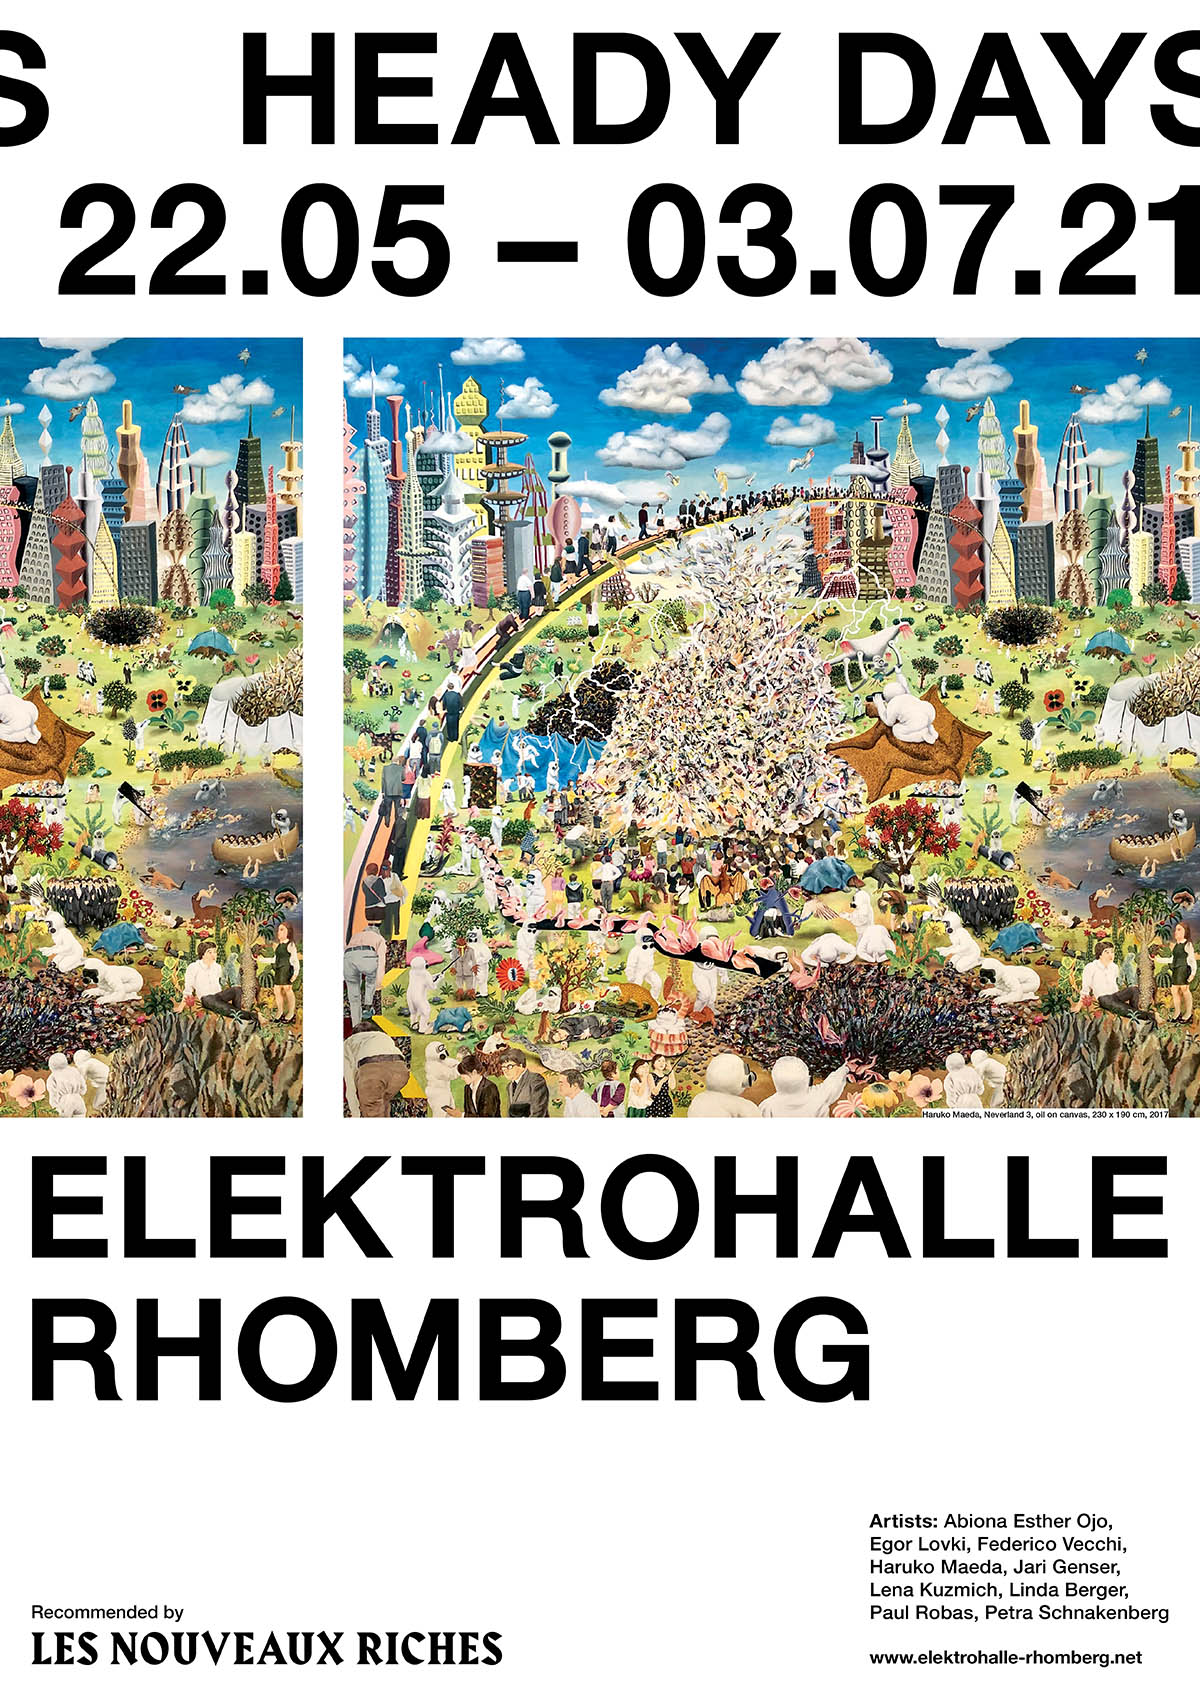 ELEKTROHALLE RHOMBERG Heady Days Recommended by Les Nouveaux Riches